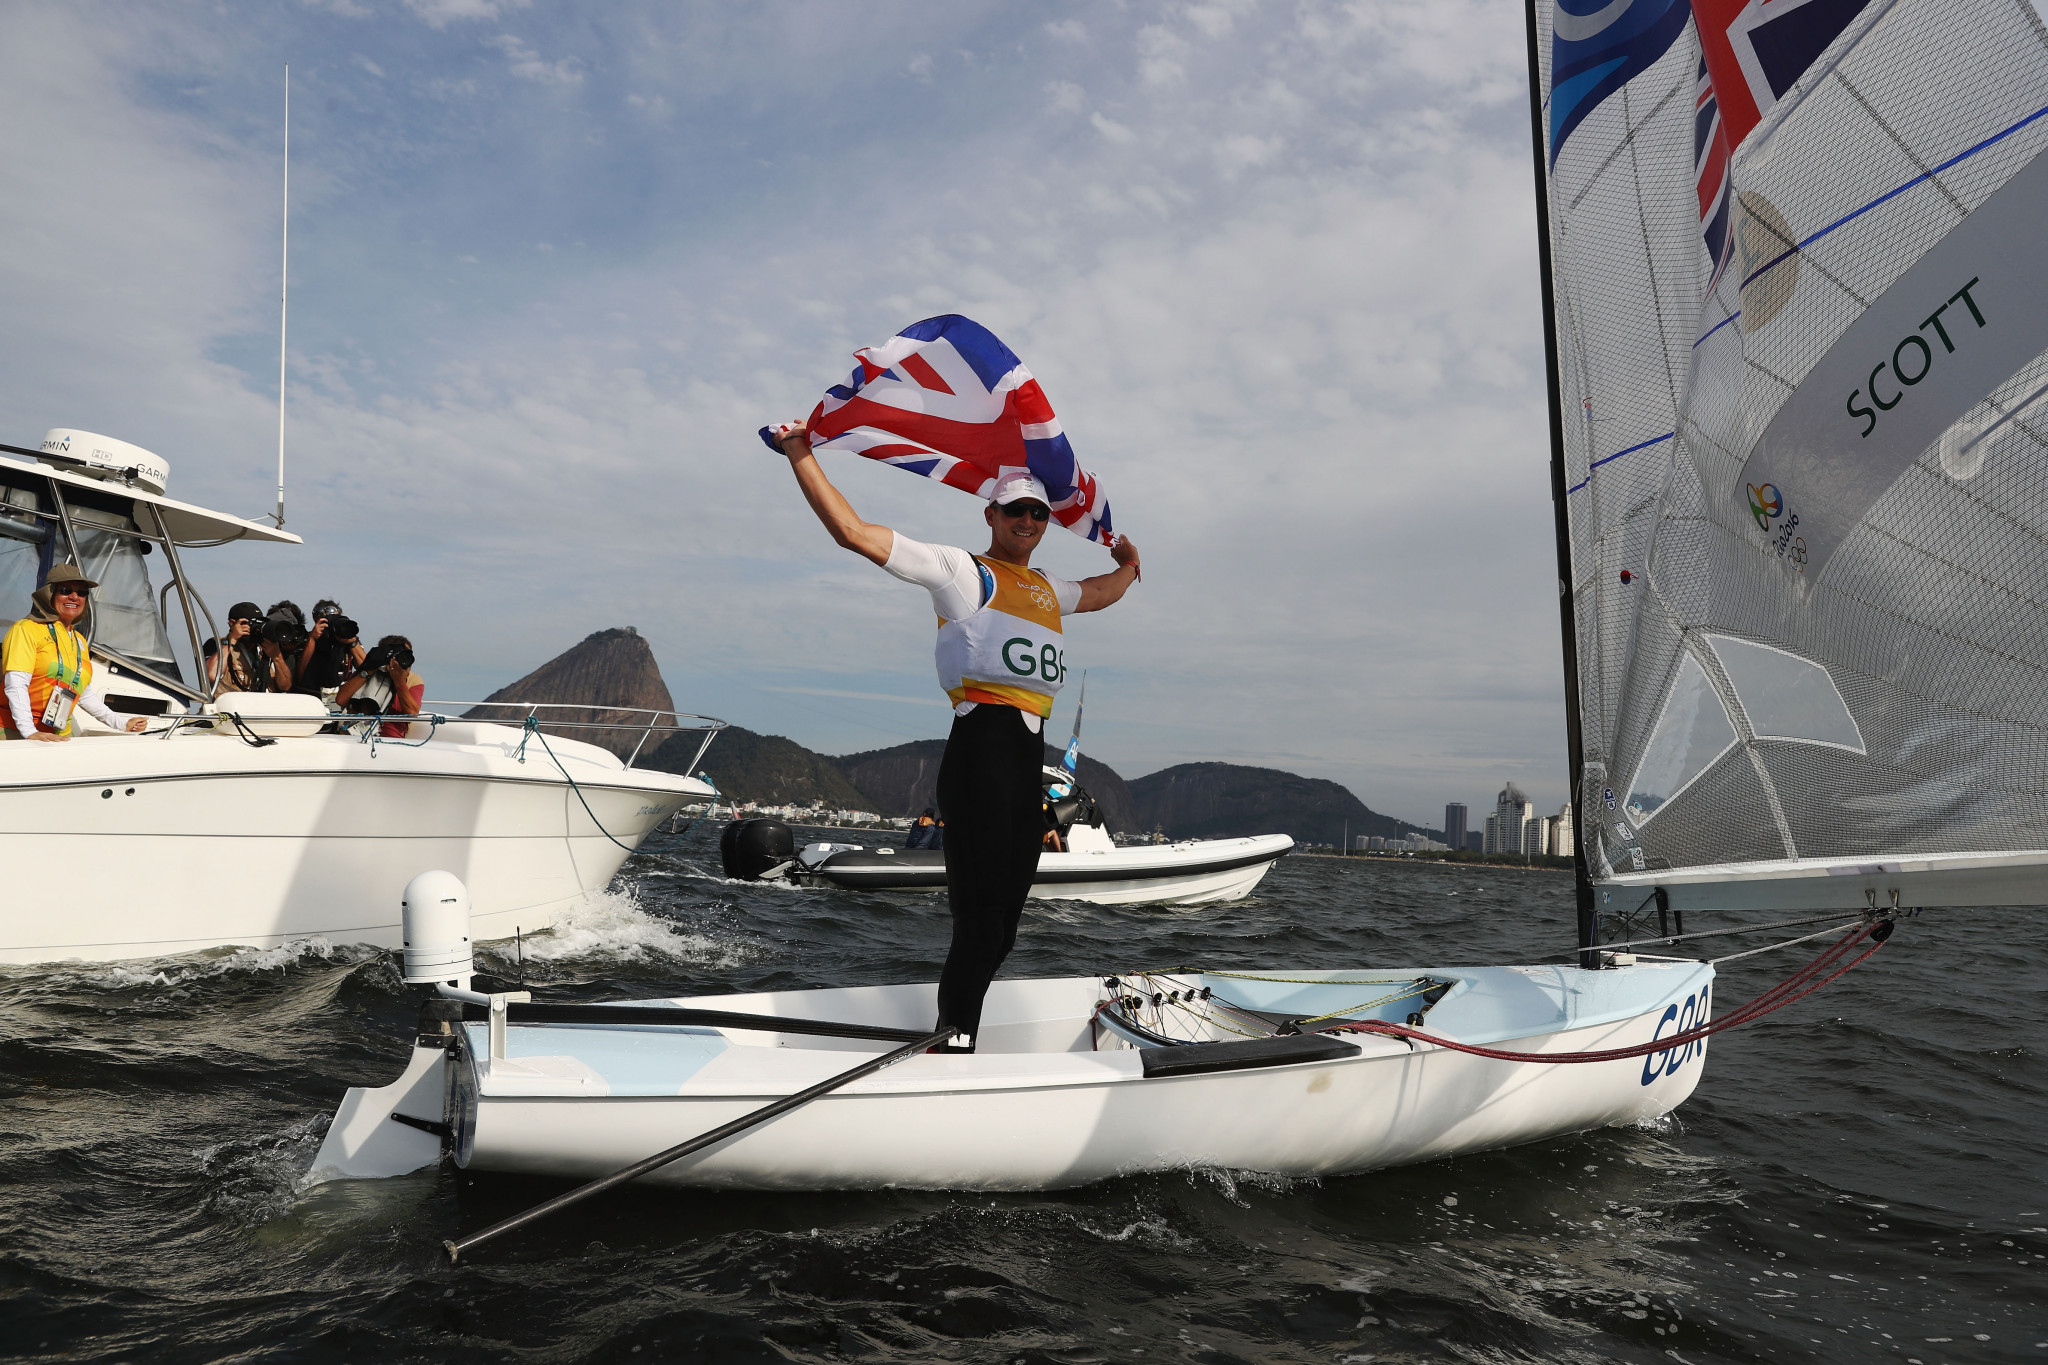 Giles Scott, who won gold at the 2016 Olympic Games in Rio, has work to do to retain the Finn European Championships ©Getty Images